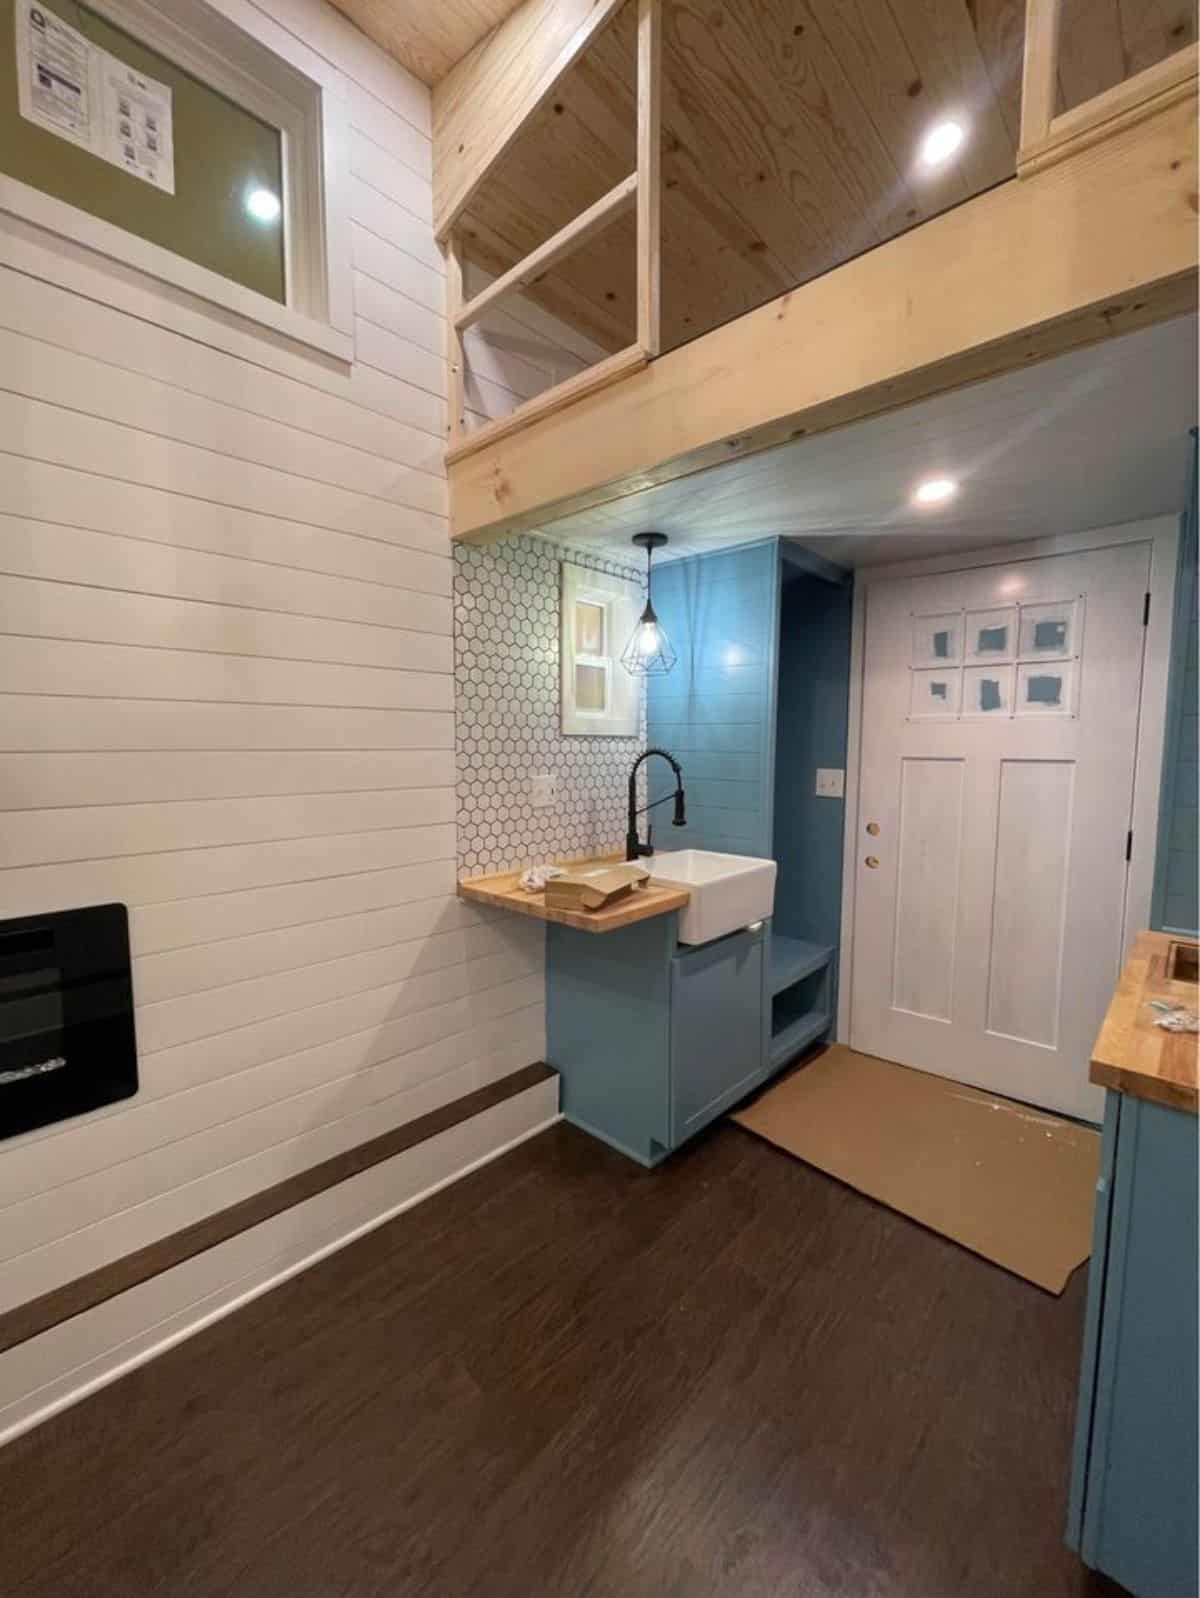 Kitchen area of 20' Modern Tiny Home is small but stylish